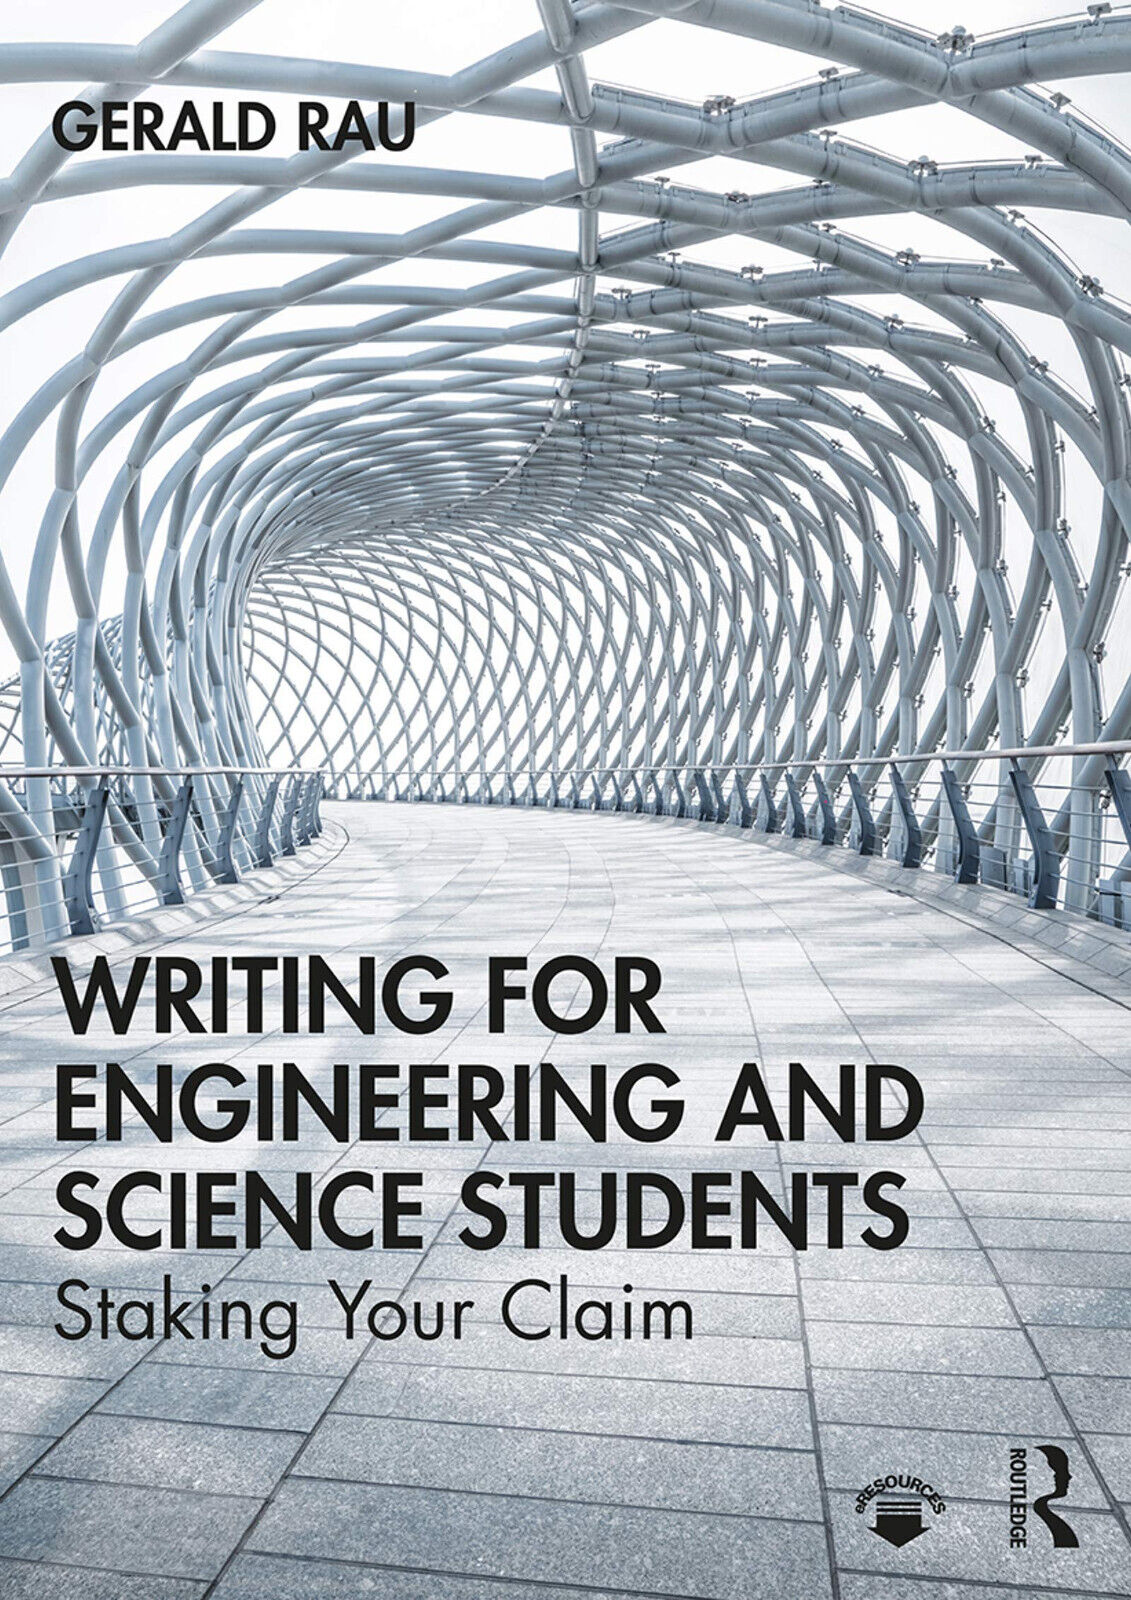 Writing for Engineering and Science Students - Gerald Rau - Routledge, 2019